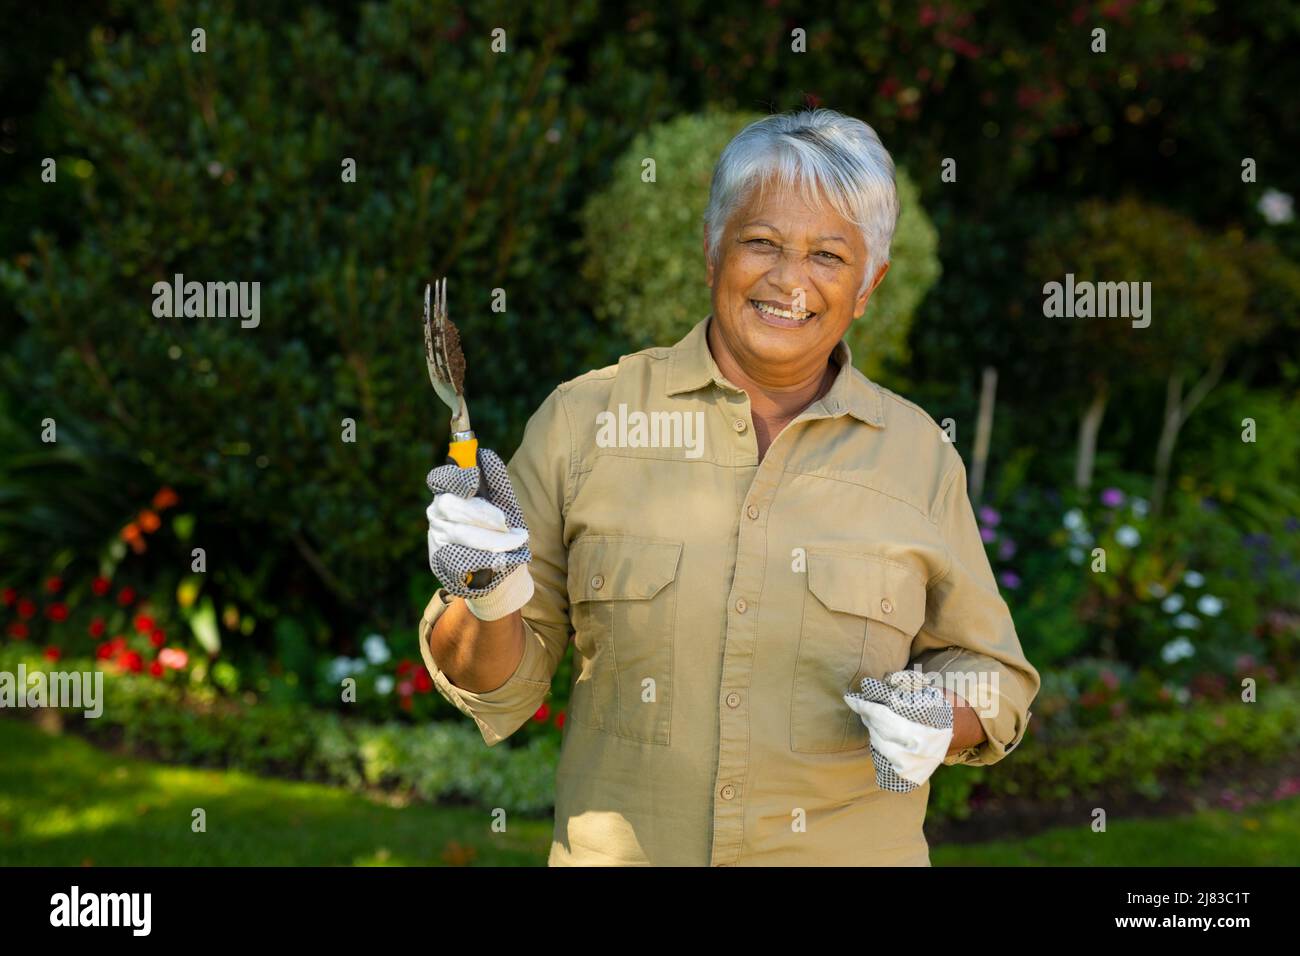 Portrait of smiling biracial senior woman with short hair wearing gloves and holding gardening fork Stock Photo